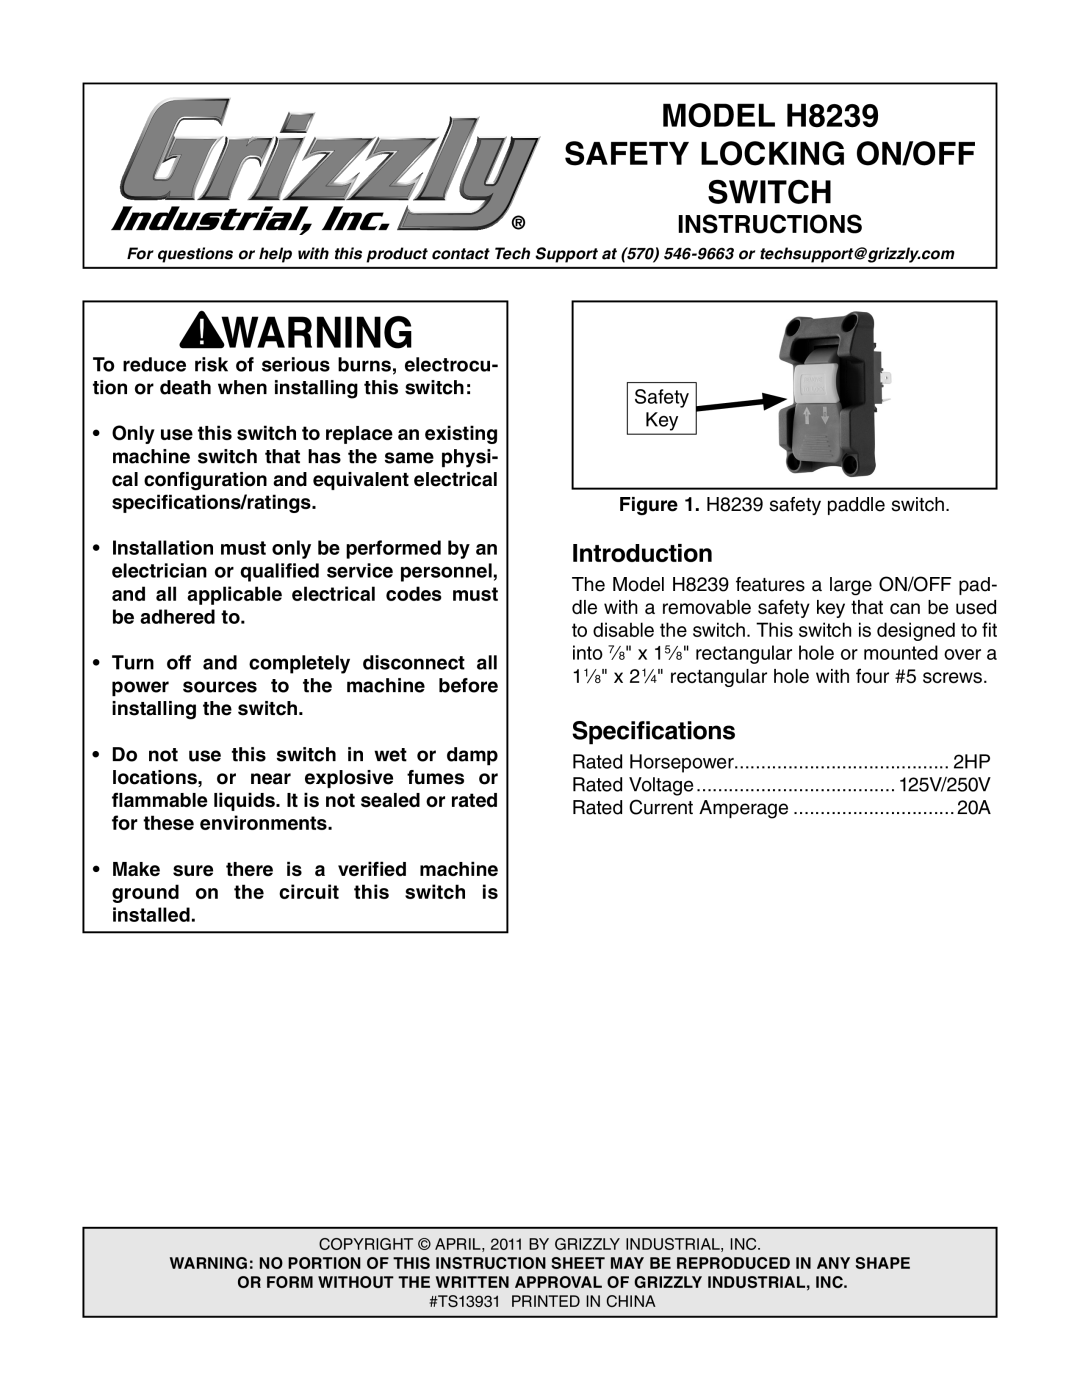 Grizzly specifications Introduction, Specifications, MODEL H8239, Safety Locking On/Off, Switch, Instructions 